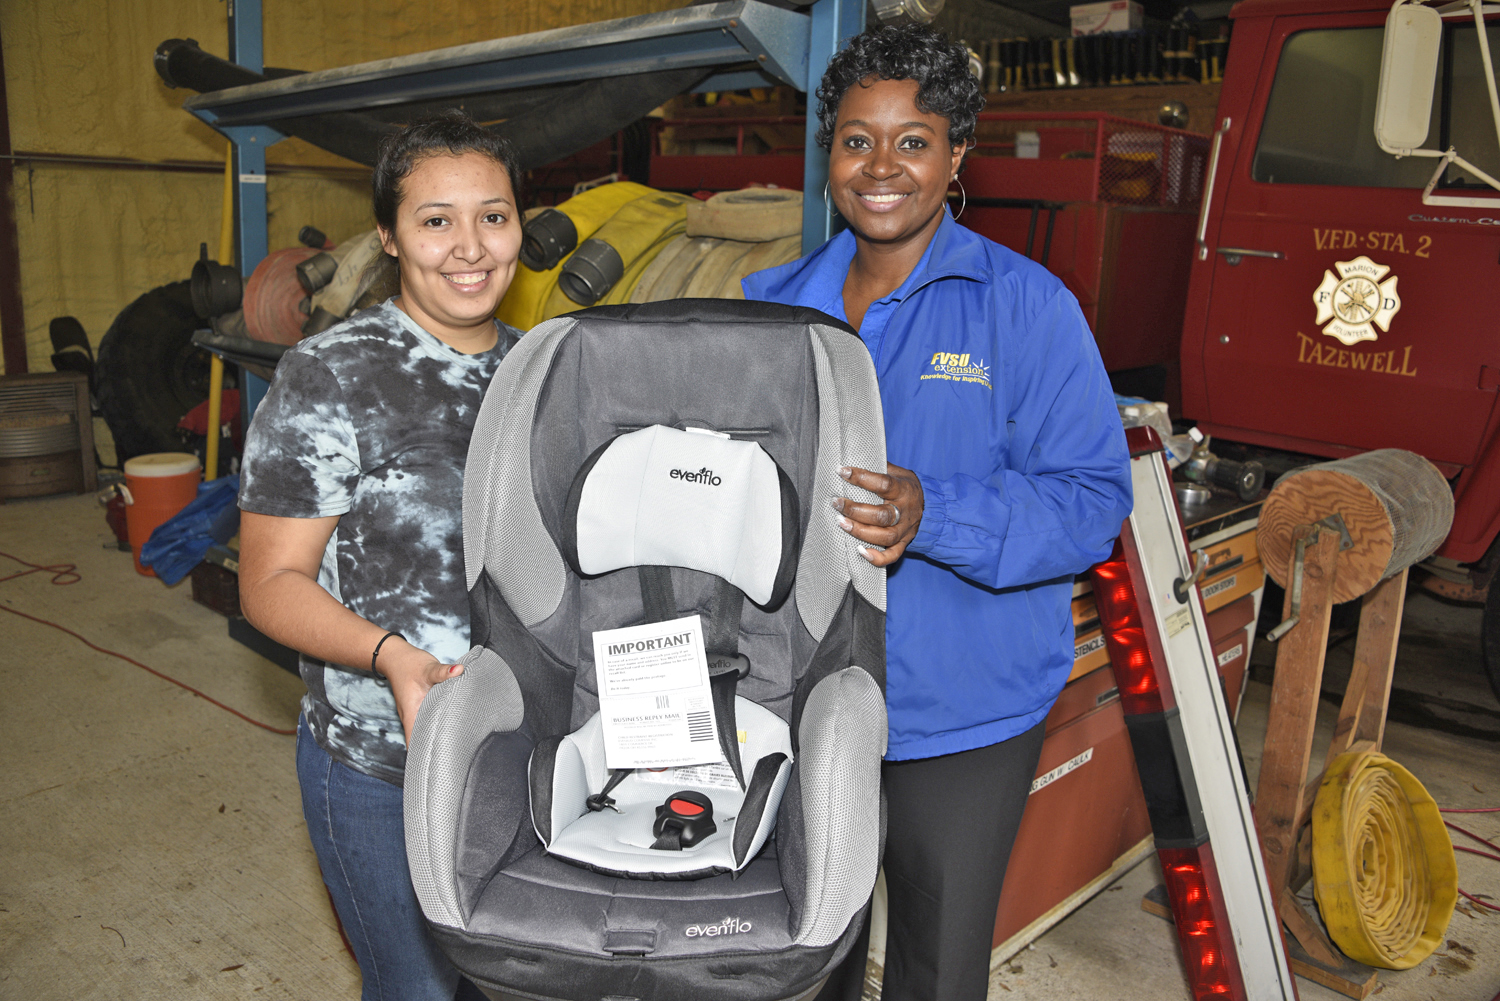 Alejandrina Herrera (left), a native of Buena Vista, holds a brand new car seat she received from Brenda Maddox (right), Fort Valley State University’s Marion County Extension agent, after successfully completing a car seat safety class on Feb. 21.